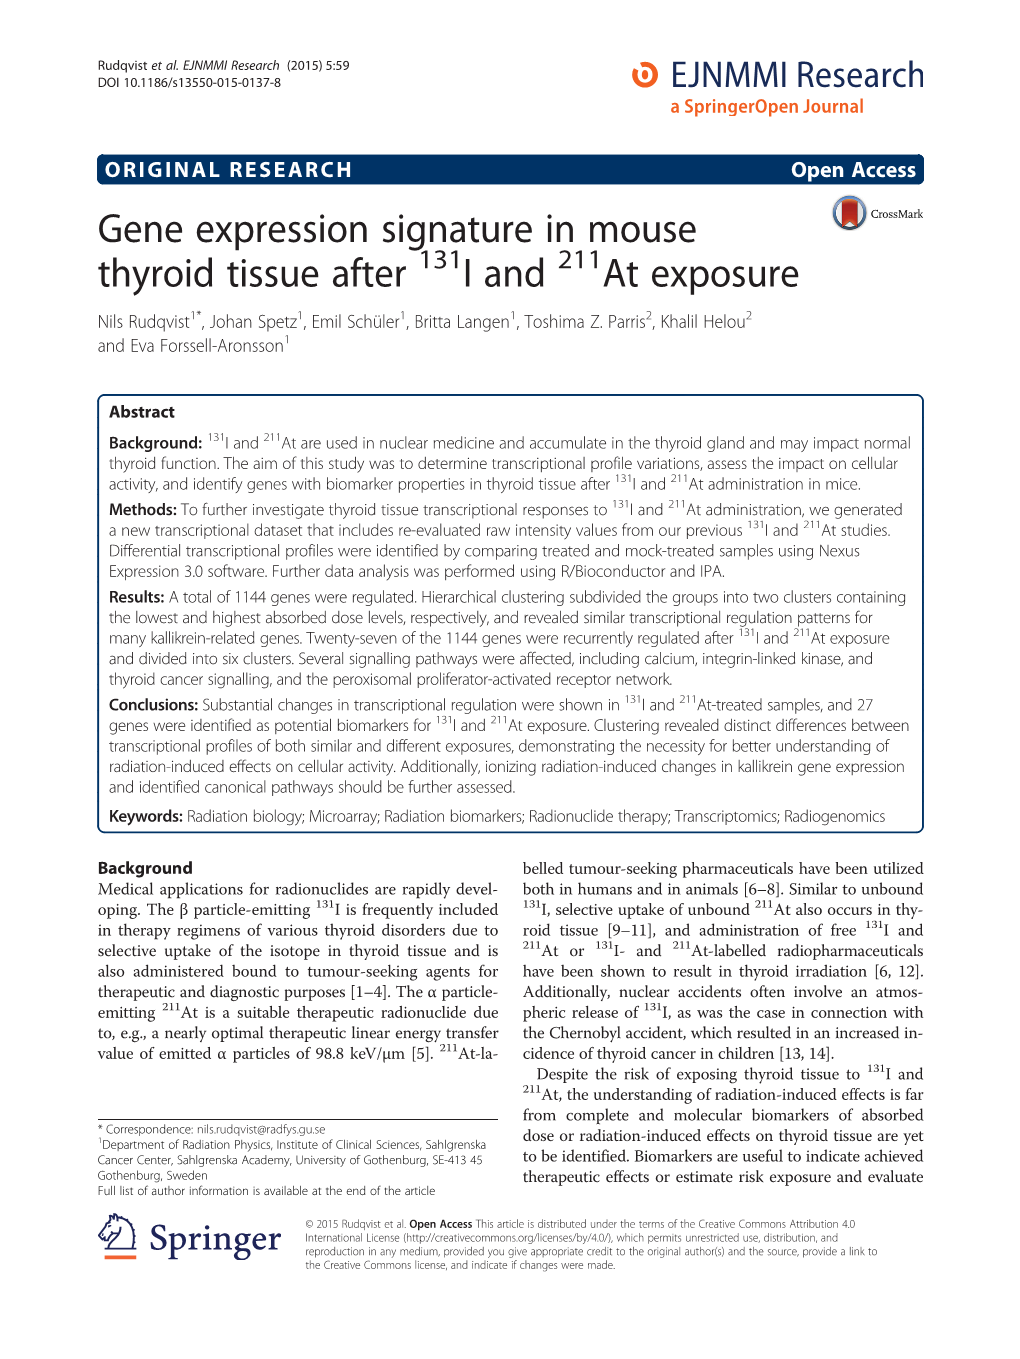 Gene Expression Signature in Mouse Thyroid Tissue After 131I and 211At Exposure Nils Rudqvist1*, Johan Spetz1, Emil Schüler1, Britta Langen1, Toshima Z